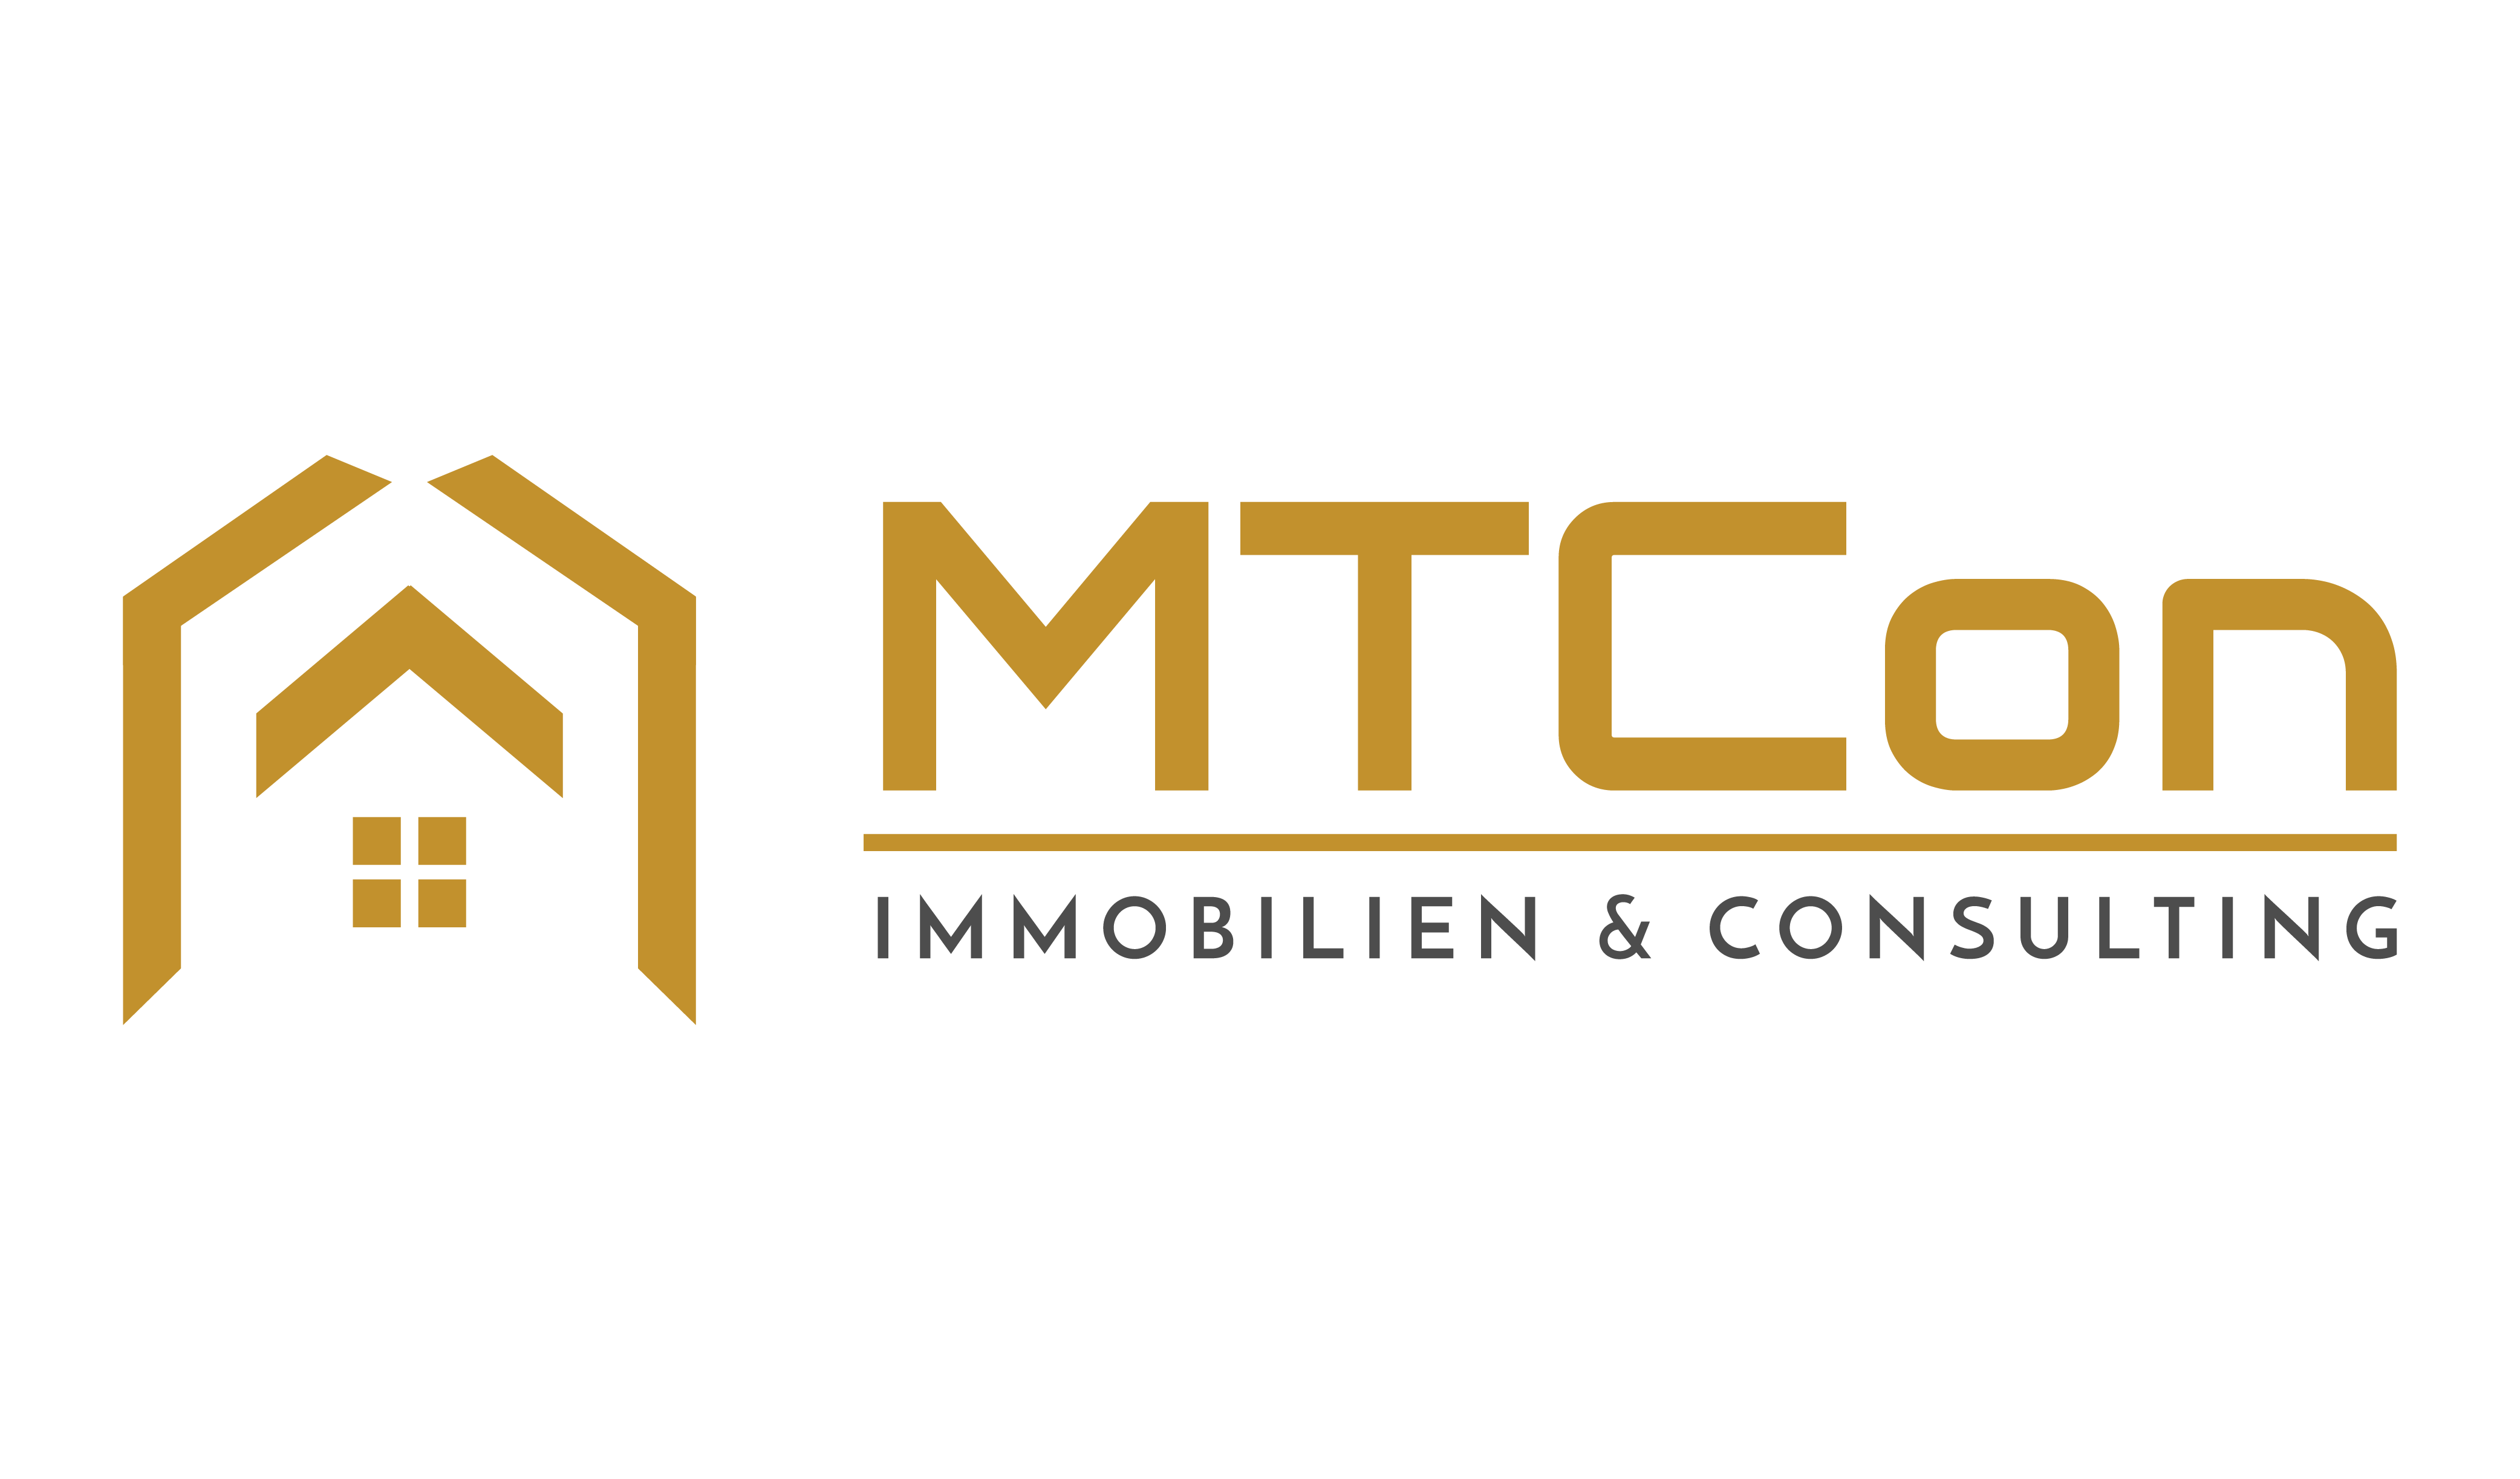 MTCon Immobilien & Consulting  Logo